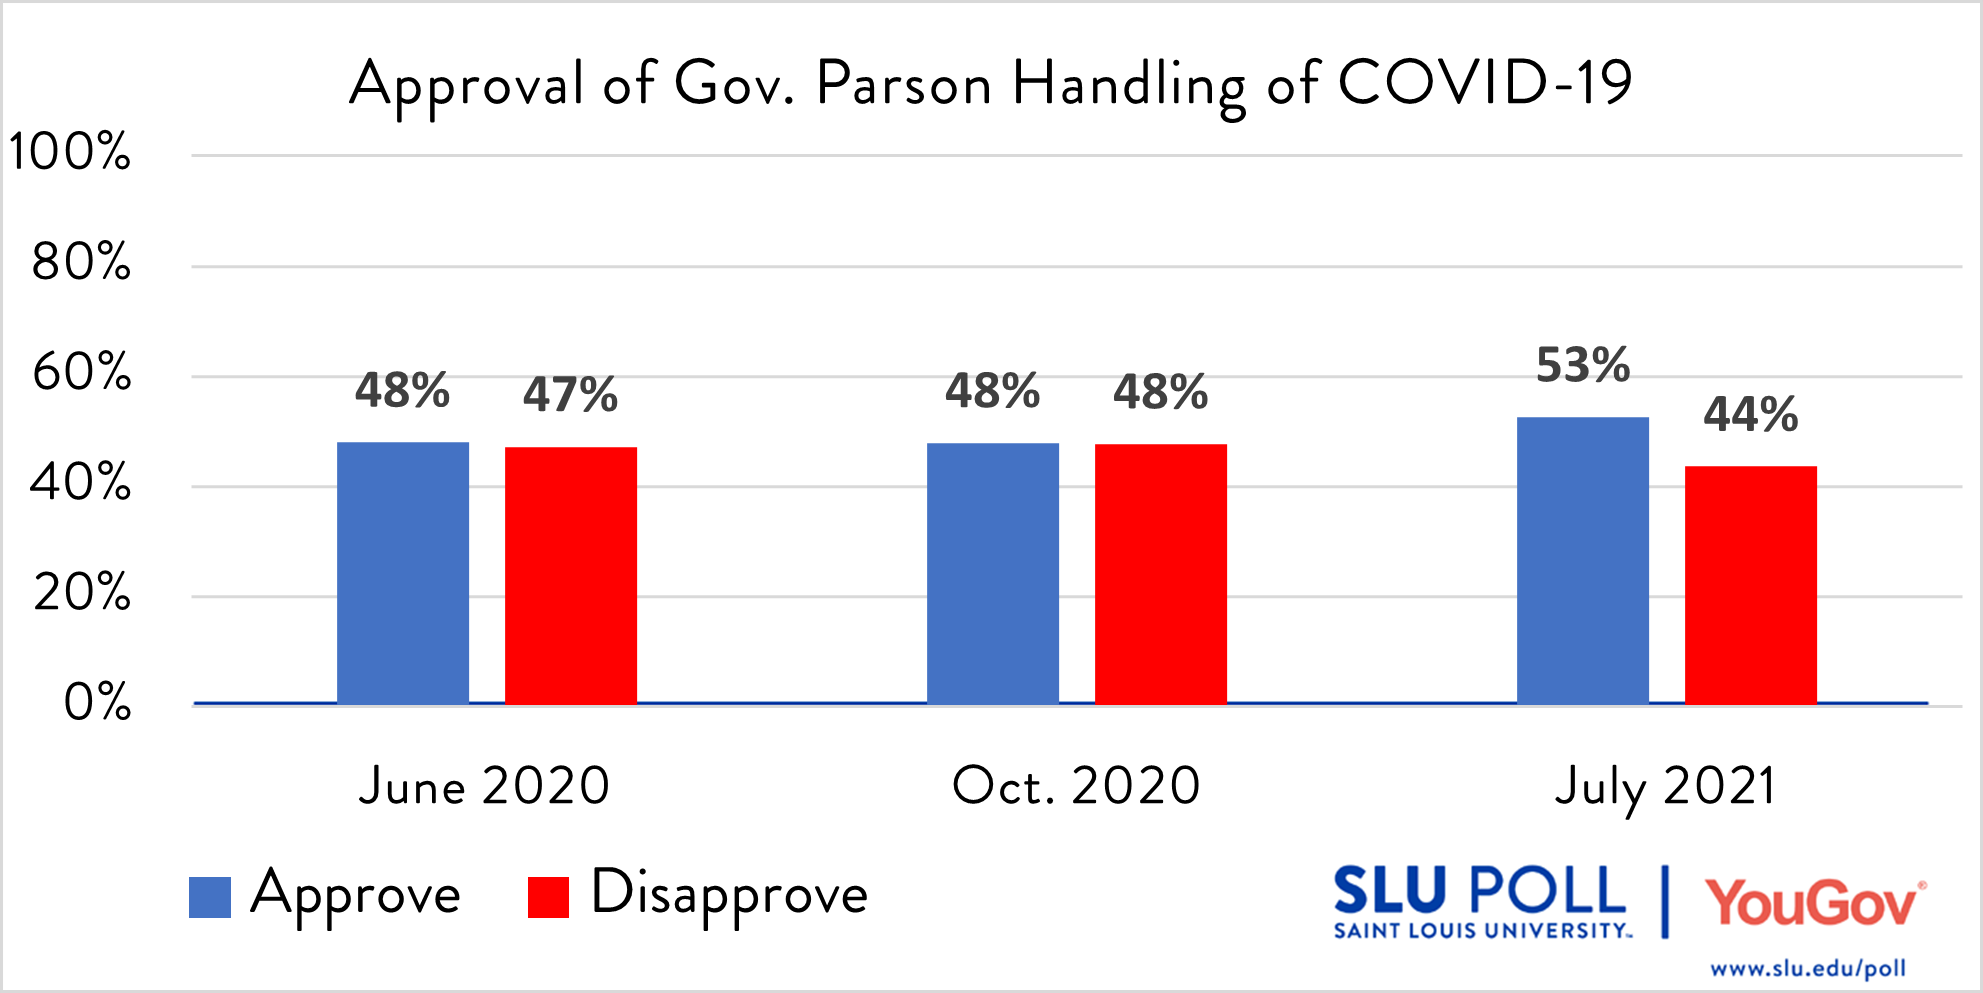 Do you approve or disapprove of the way each has handled the COVID-19 Pandemic… Governor Mike Parson? - Strongly approve: 14% - Approve: 39% - Disapprove: 16% - Strongly disapprove: 28%  - Not sure: 4% Subsample Question: The sample size for this question is 473. The margin of error for the full results for the above question is ± 5.81%.